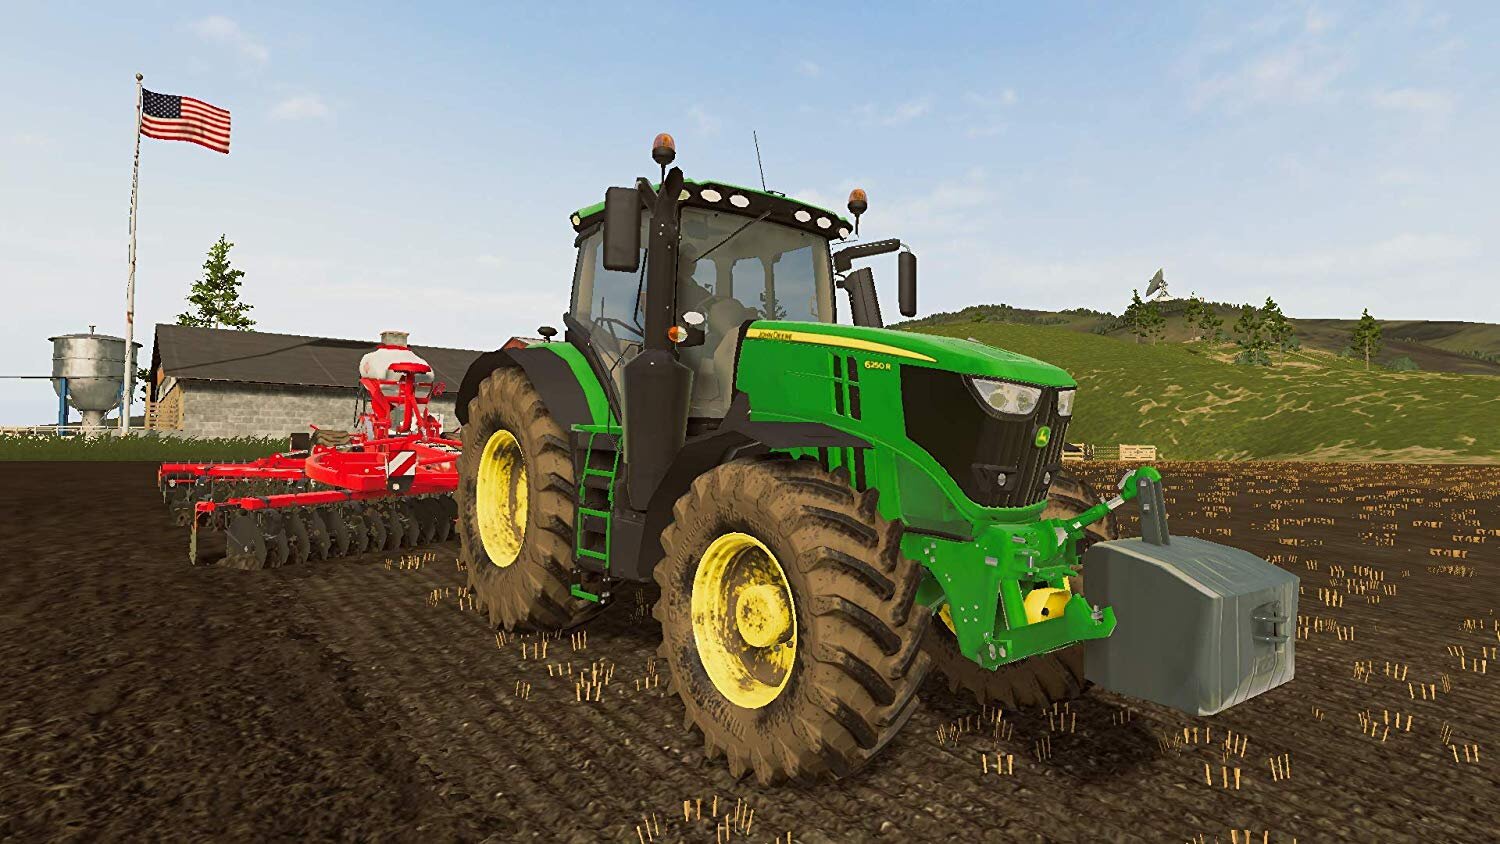 PROSTON on X: Farming Simulator 20 / FS 20 will be available